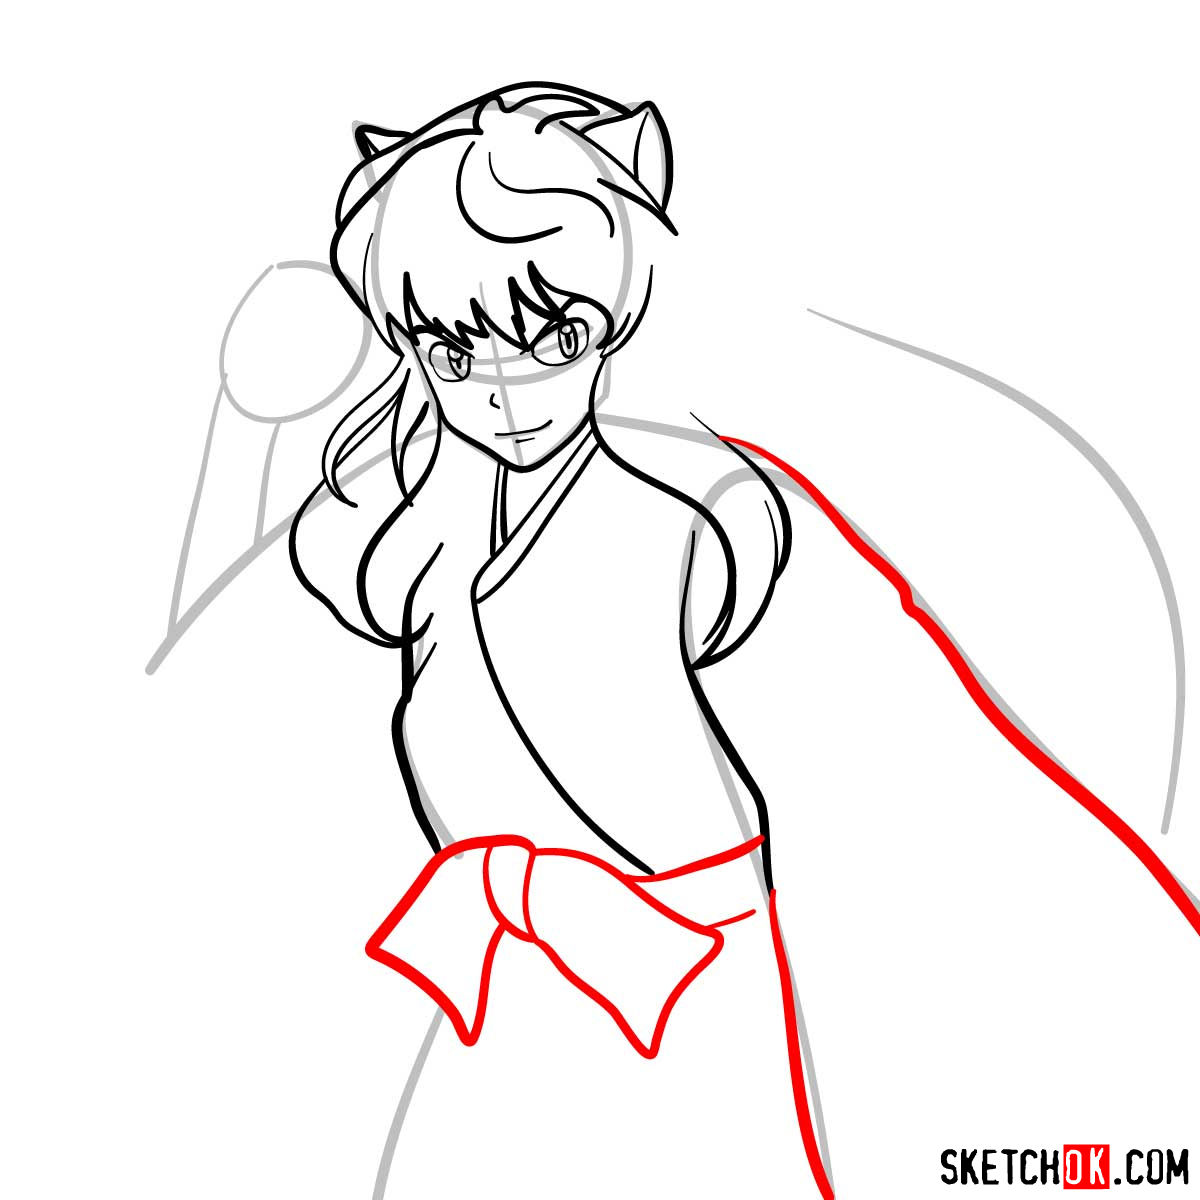 How to draw Inuyasha - 12 steps tutorial - step 08